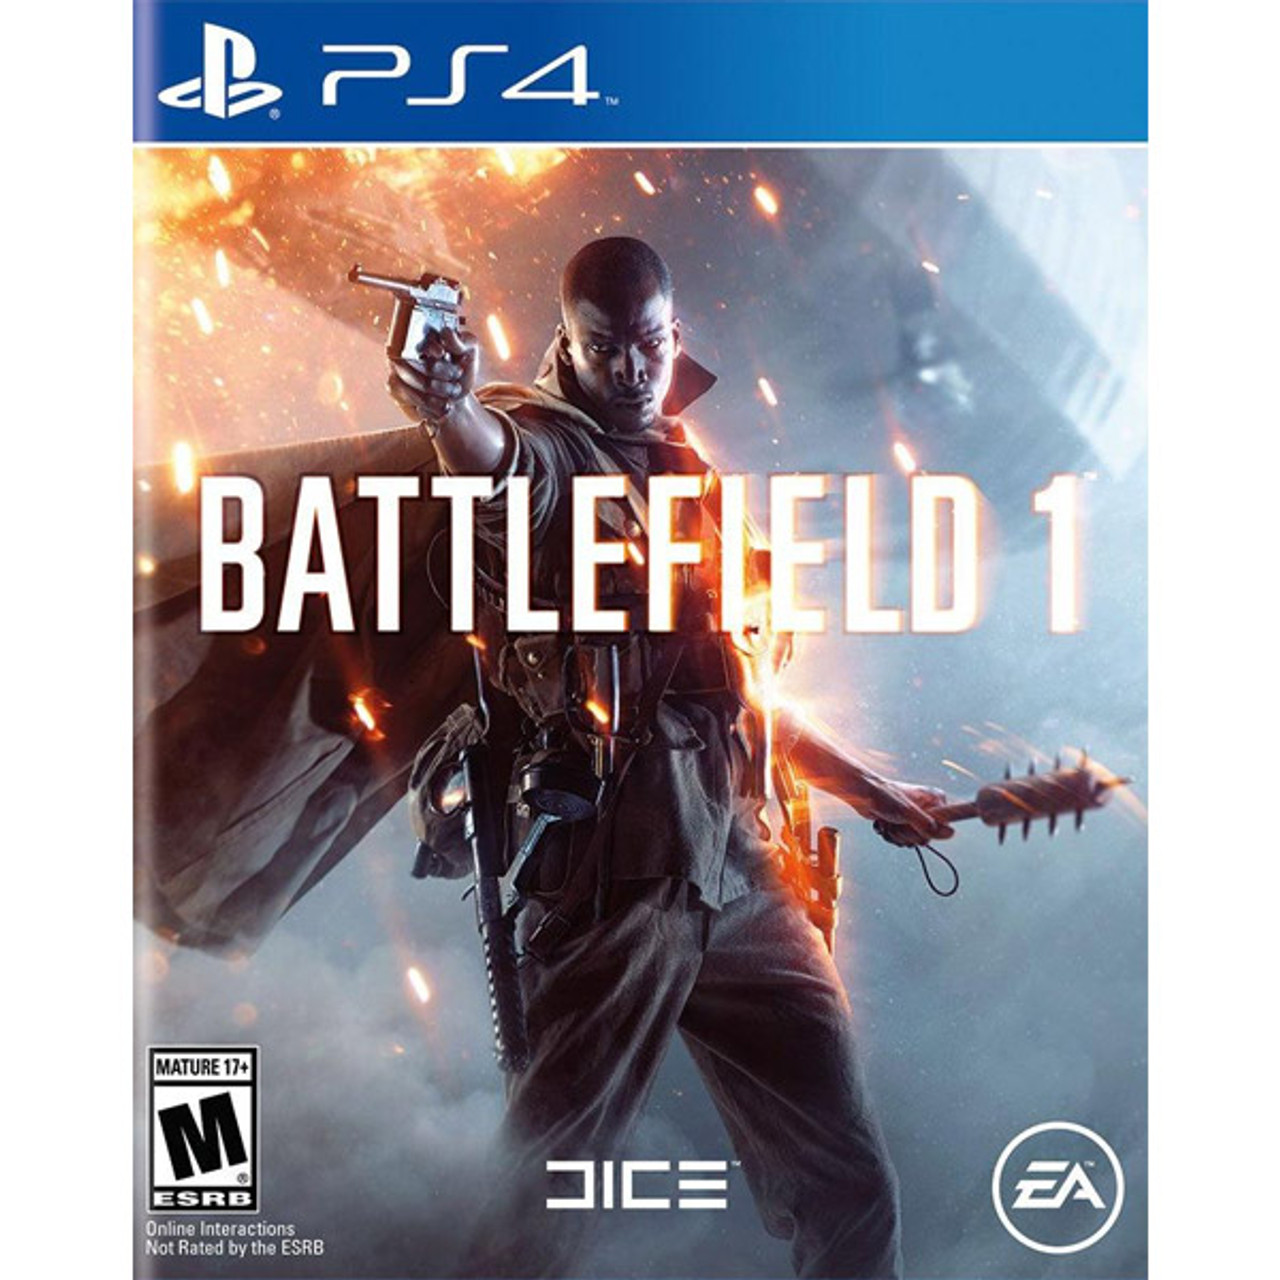 Battlefield 4 (PS4) - Pre-Owned Electronic Arts 